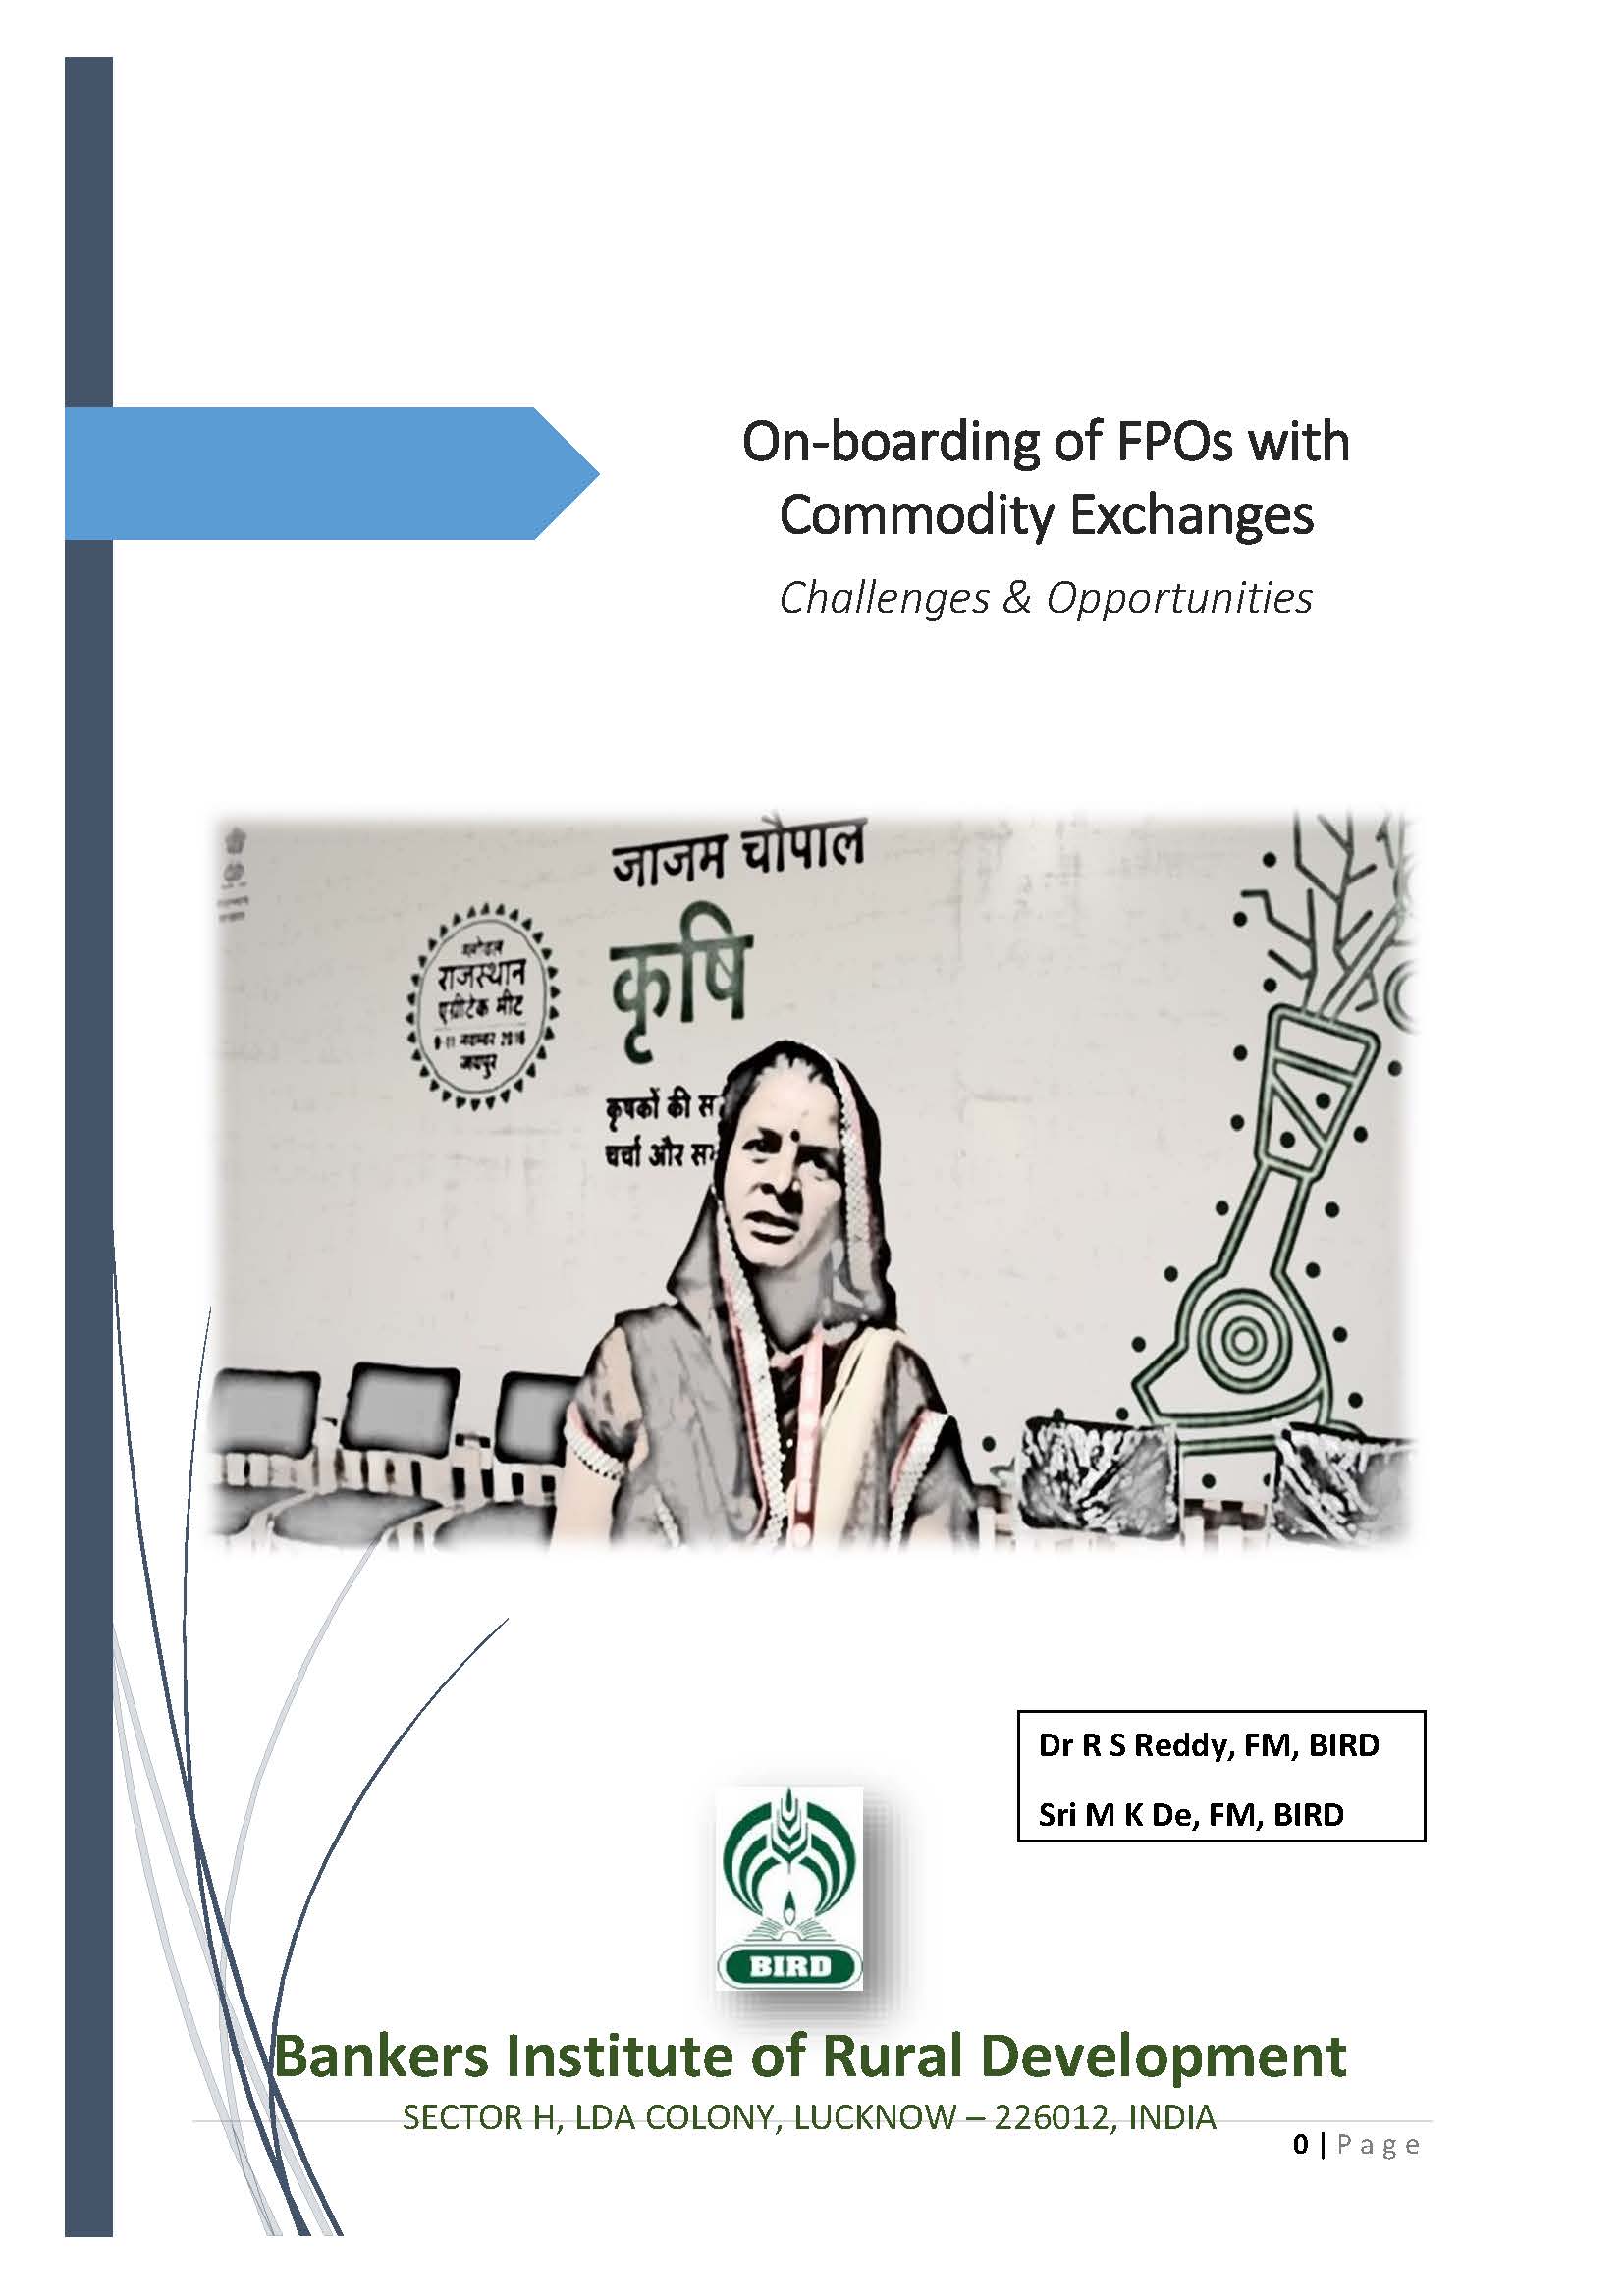 On-boarding of FPOs with Commodity Exchanges Challenges & Opportunities